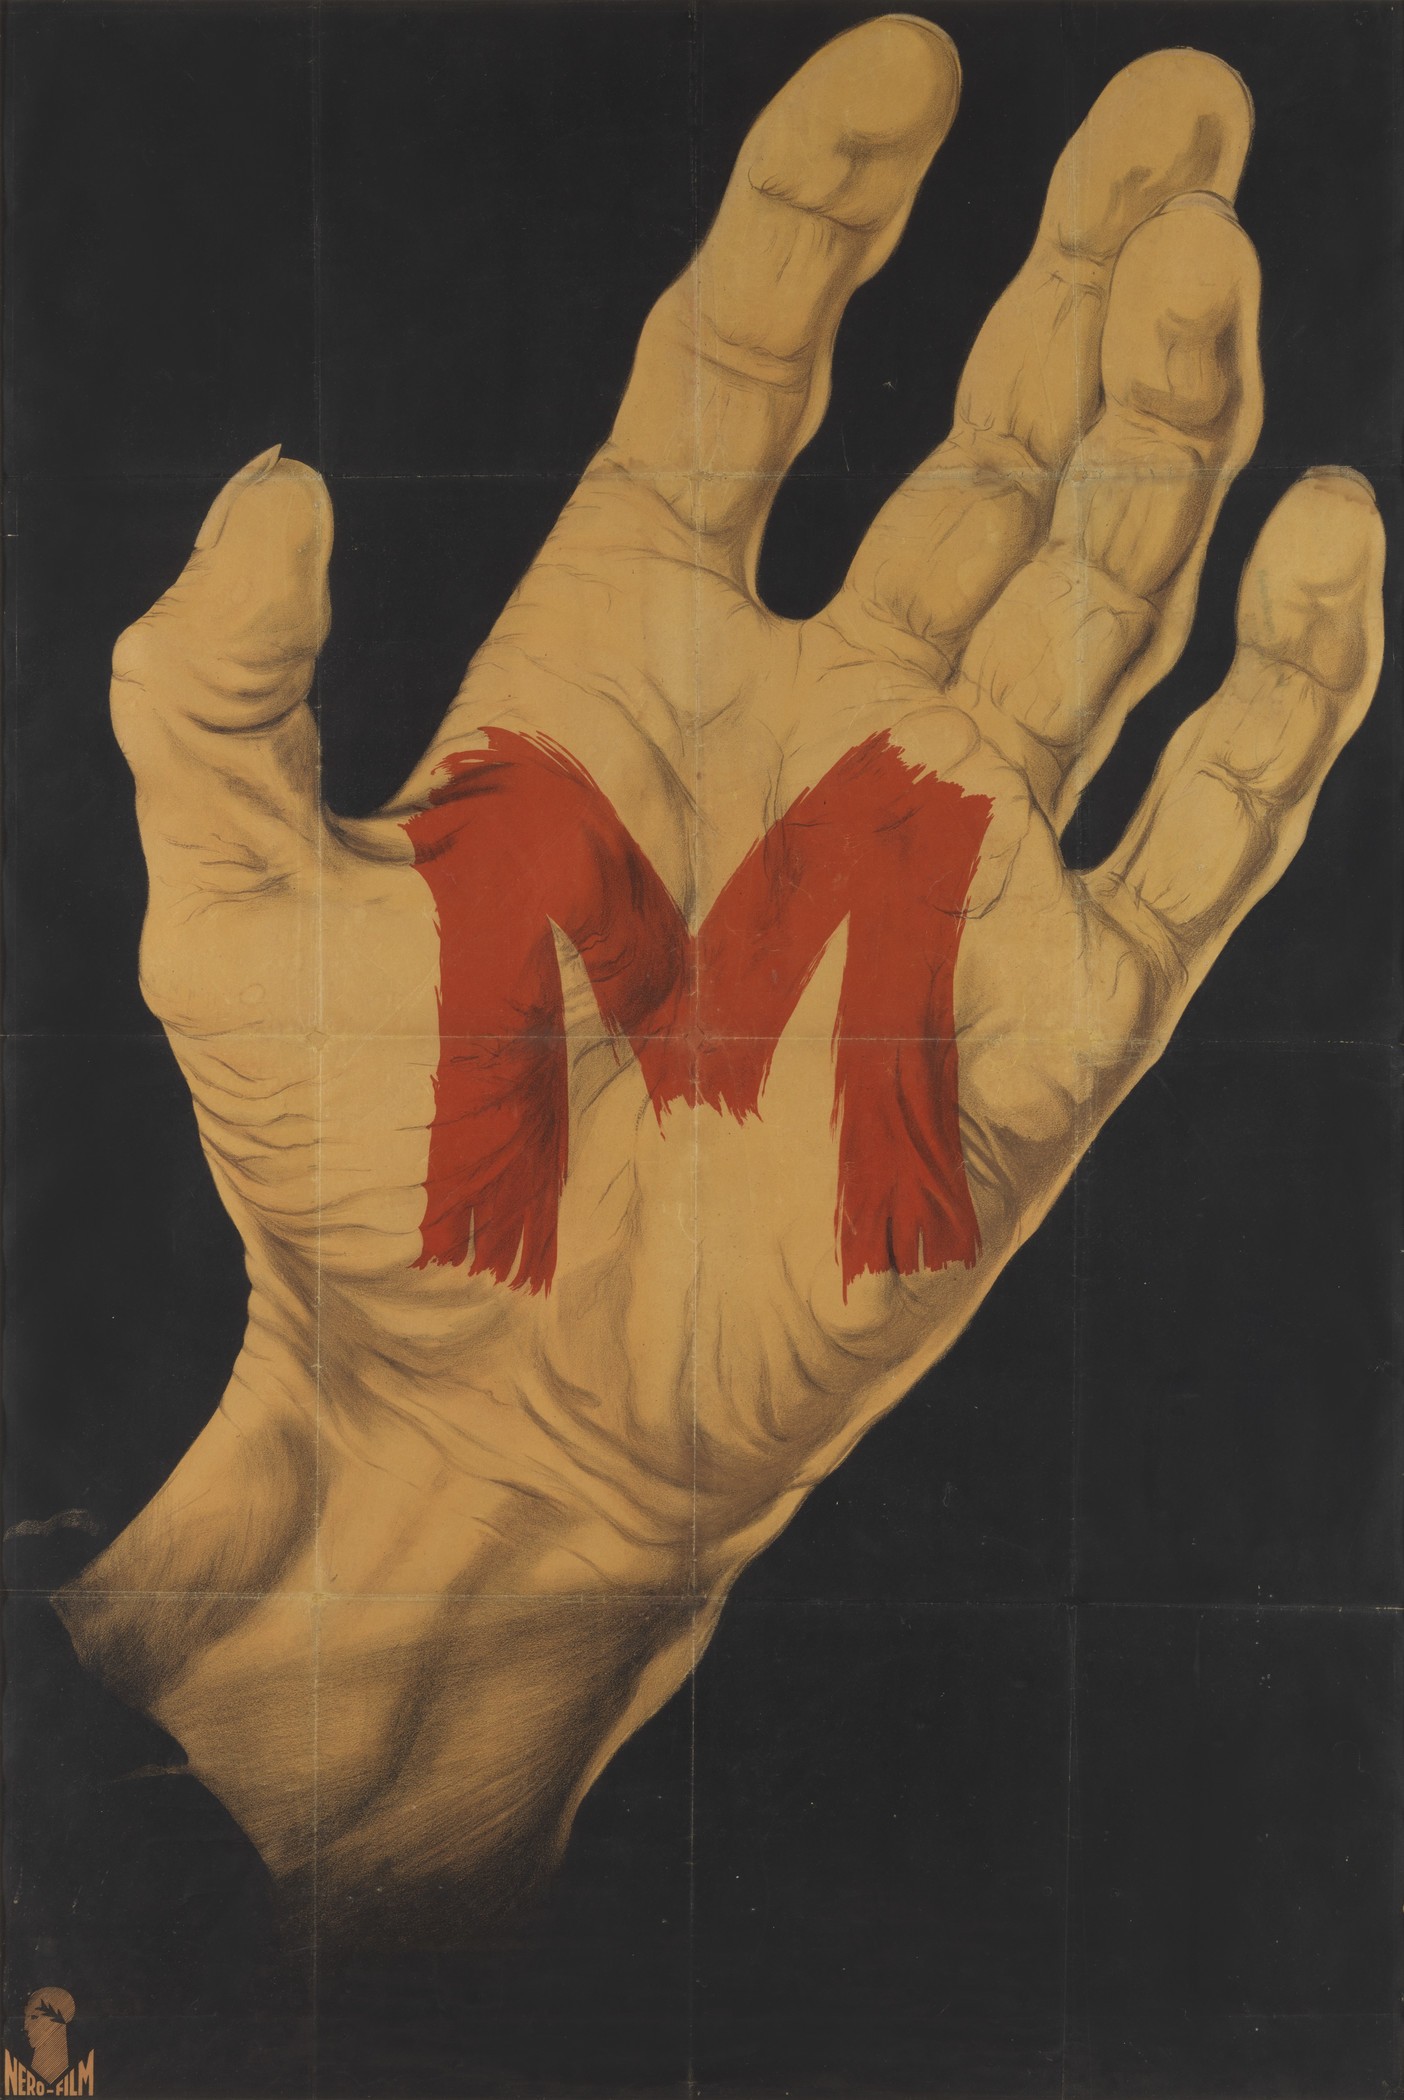 Image: Unknown, "M", 1931